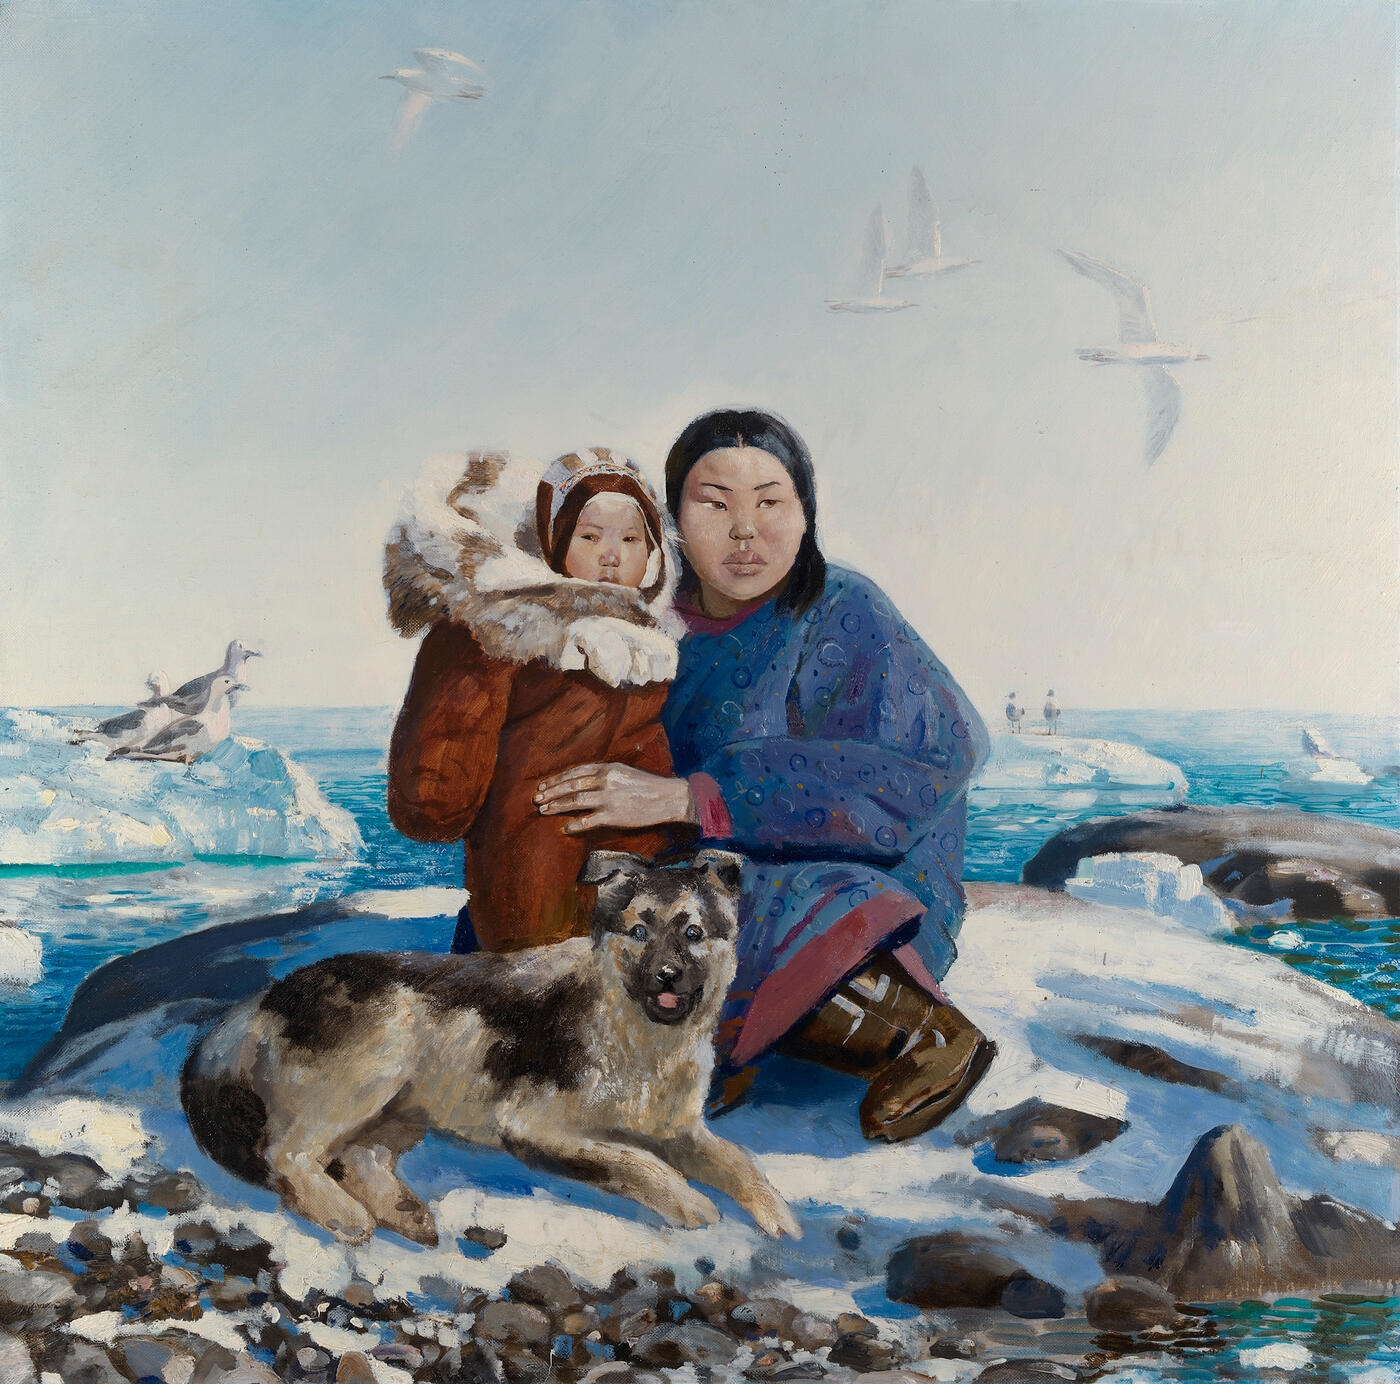 The Land’s End, from the series “Chukotka”